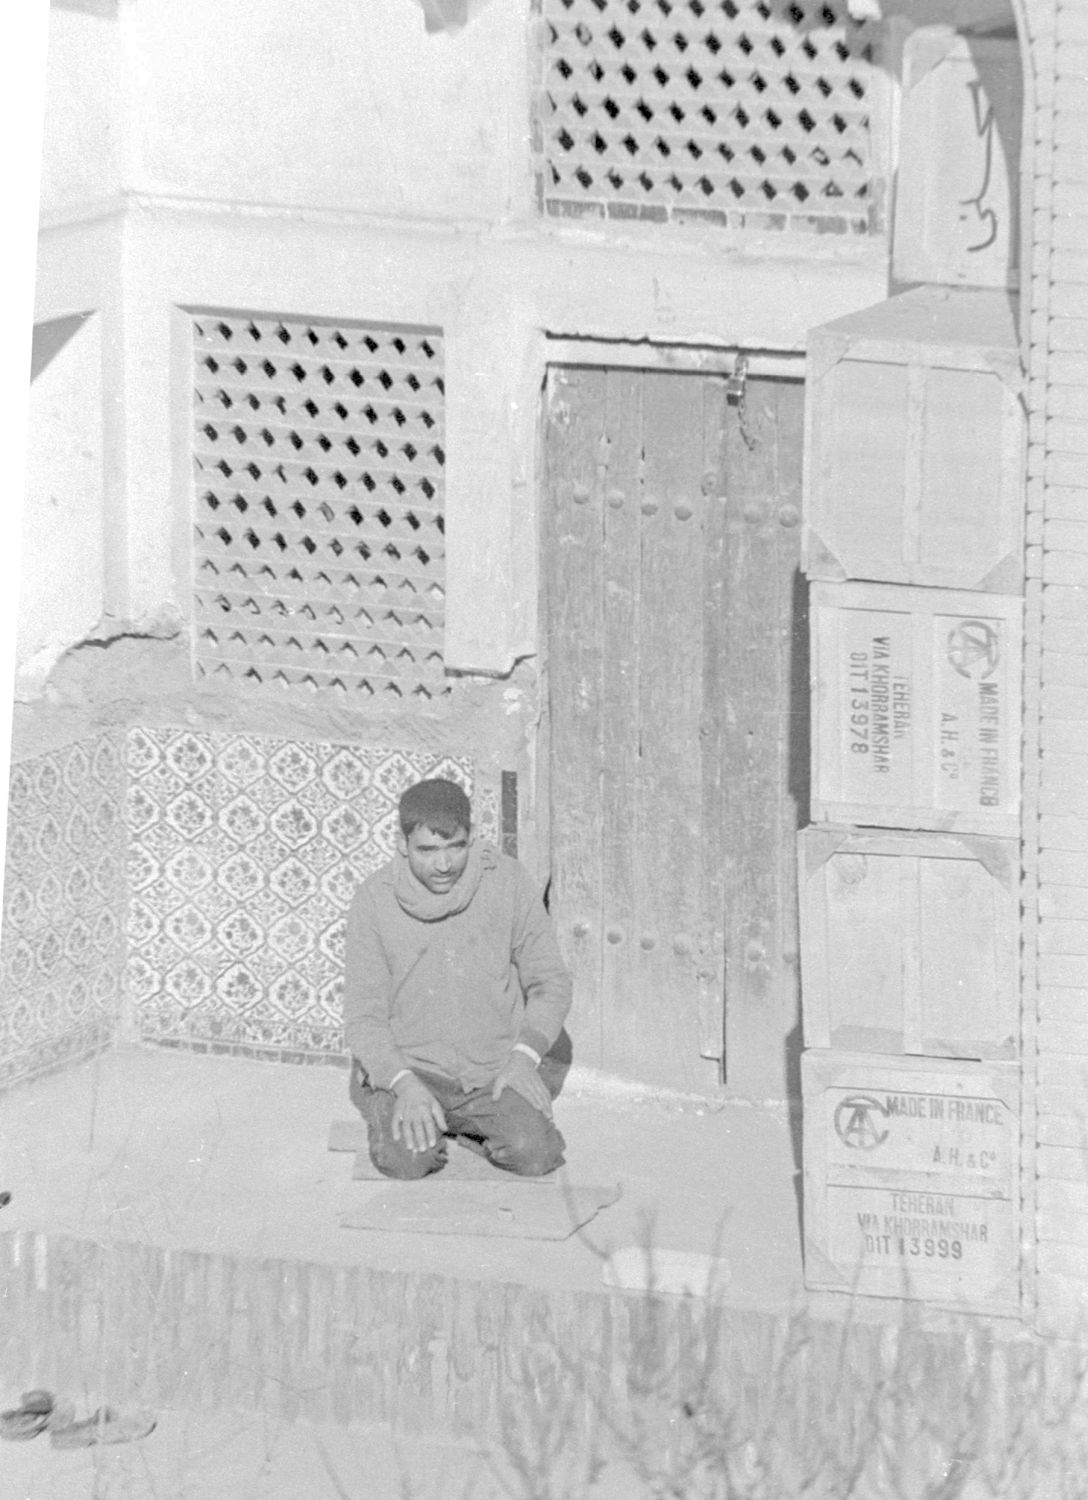 Man praying within the arched entrance to one of the cells surrounding the courtyard.